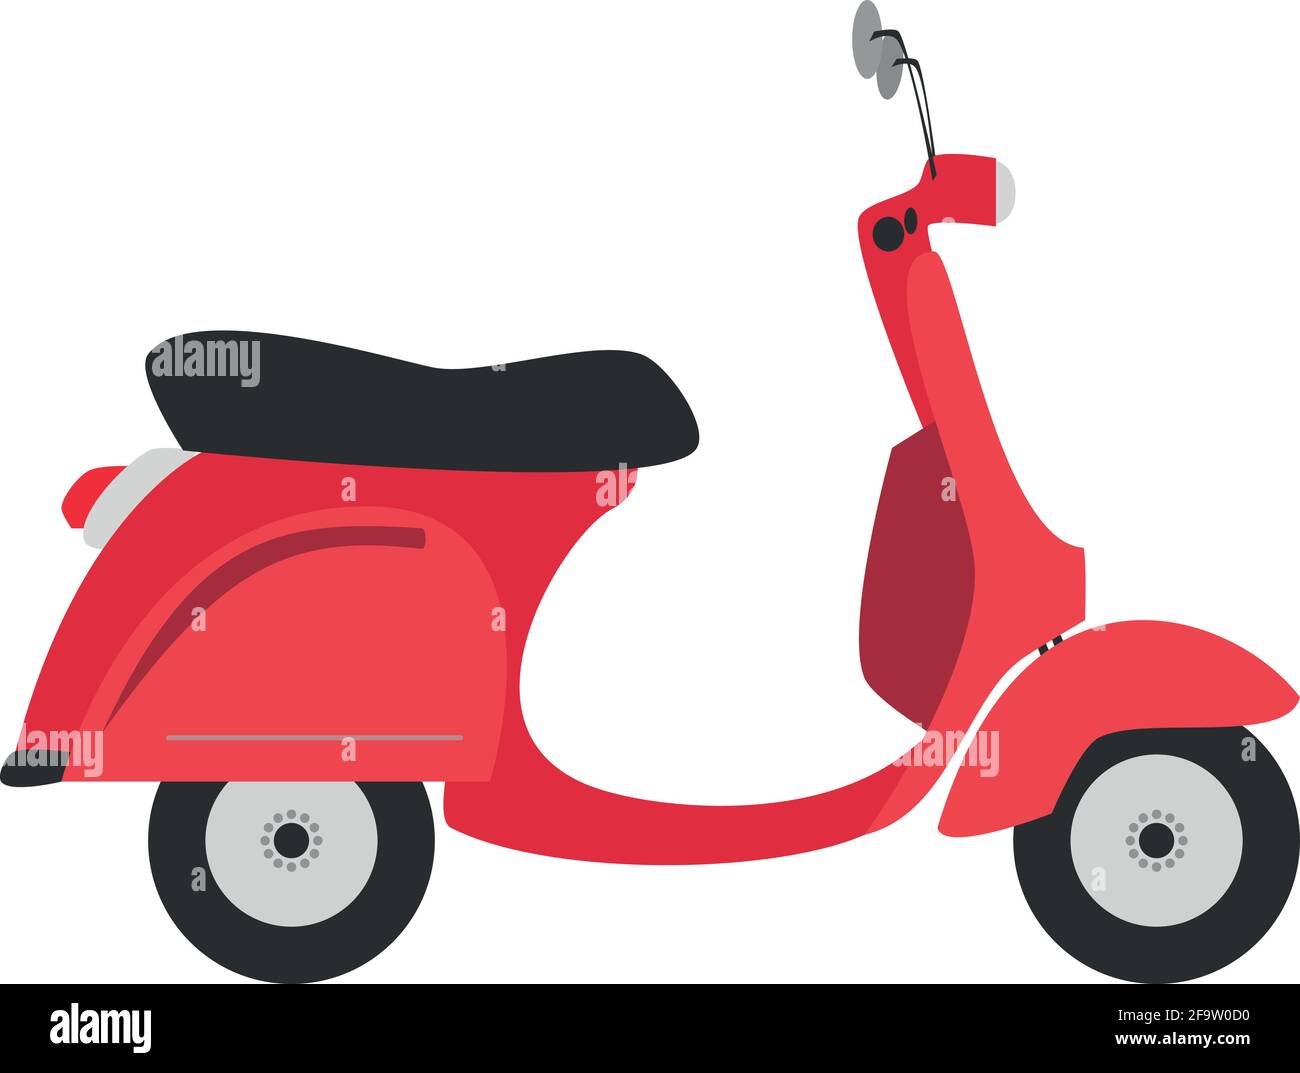 Cute cartoon vector illustration of a red motorcycle Stock Vector